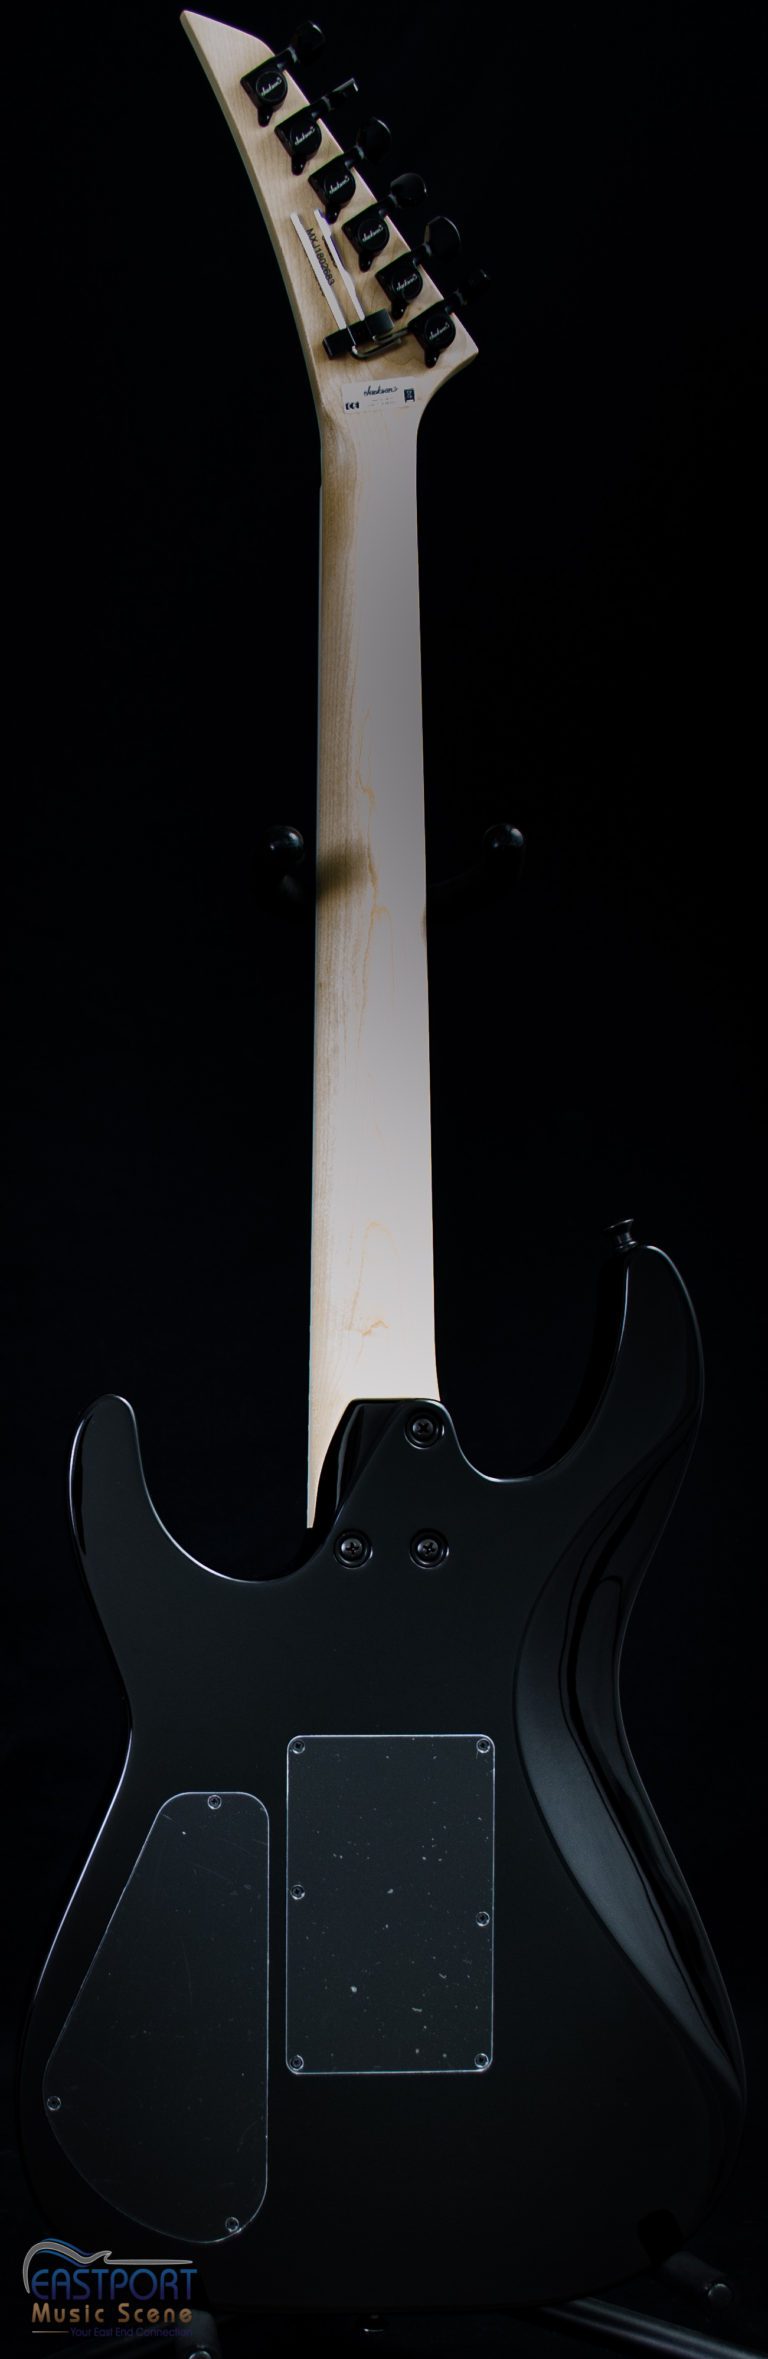 A black guitar with white trim and a white handle.